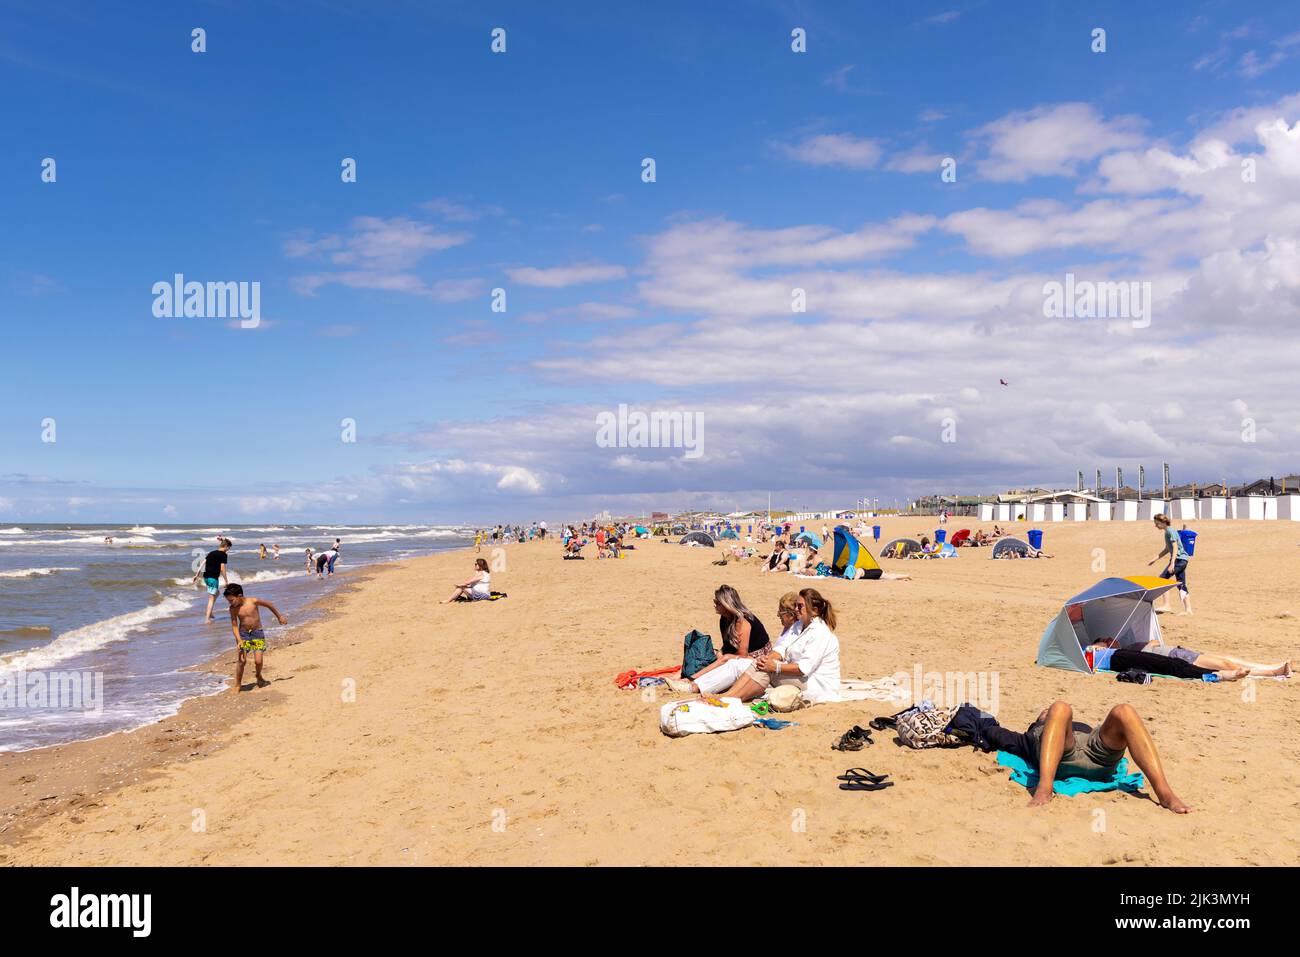 Summertime along the North Sea: People relaxing and sunbathing on the beach in Katwijk, South Holland, The Netherlands. Stock Photo